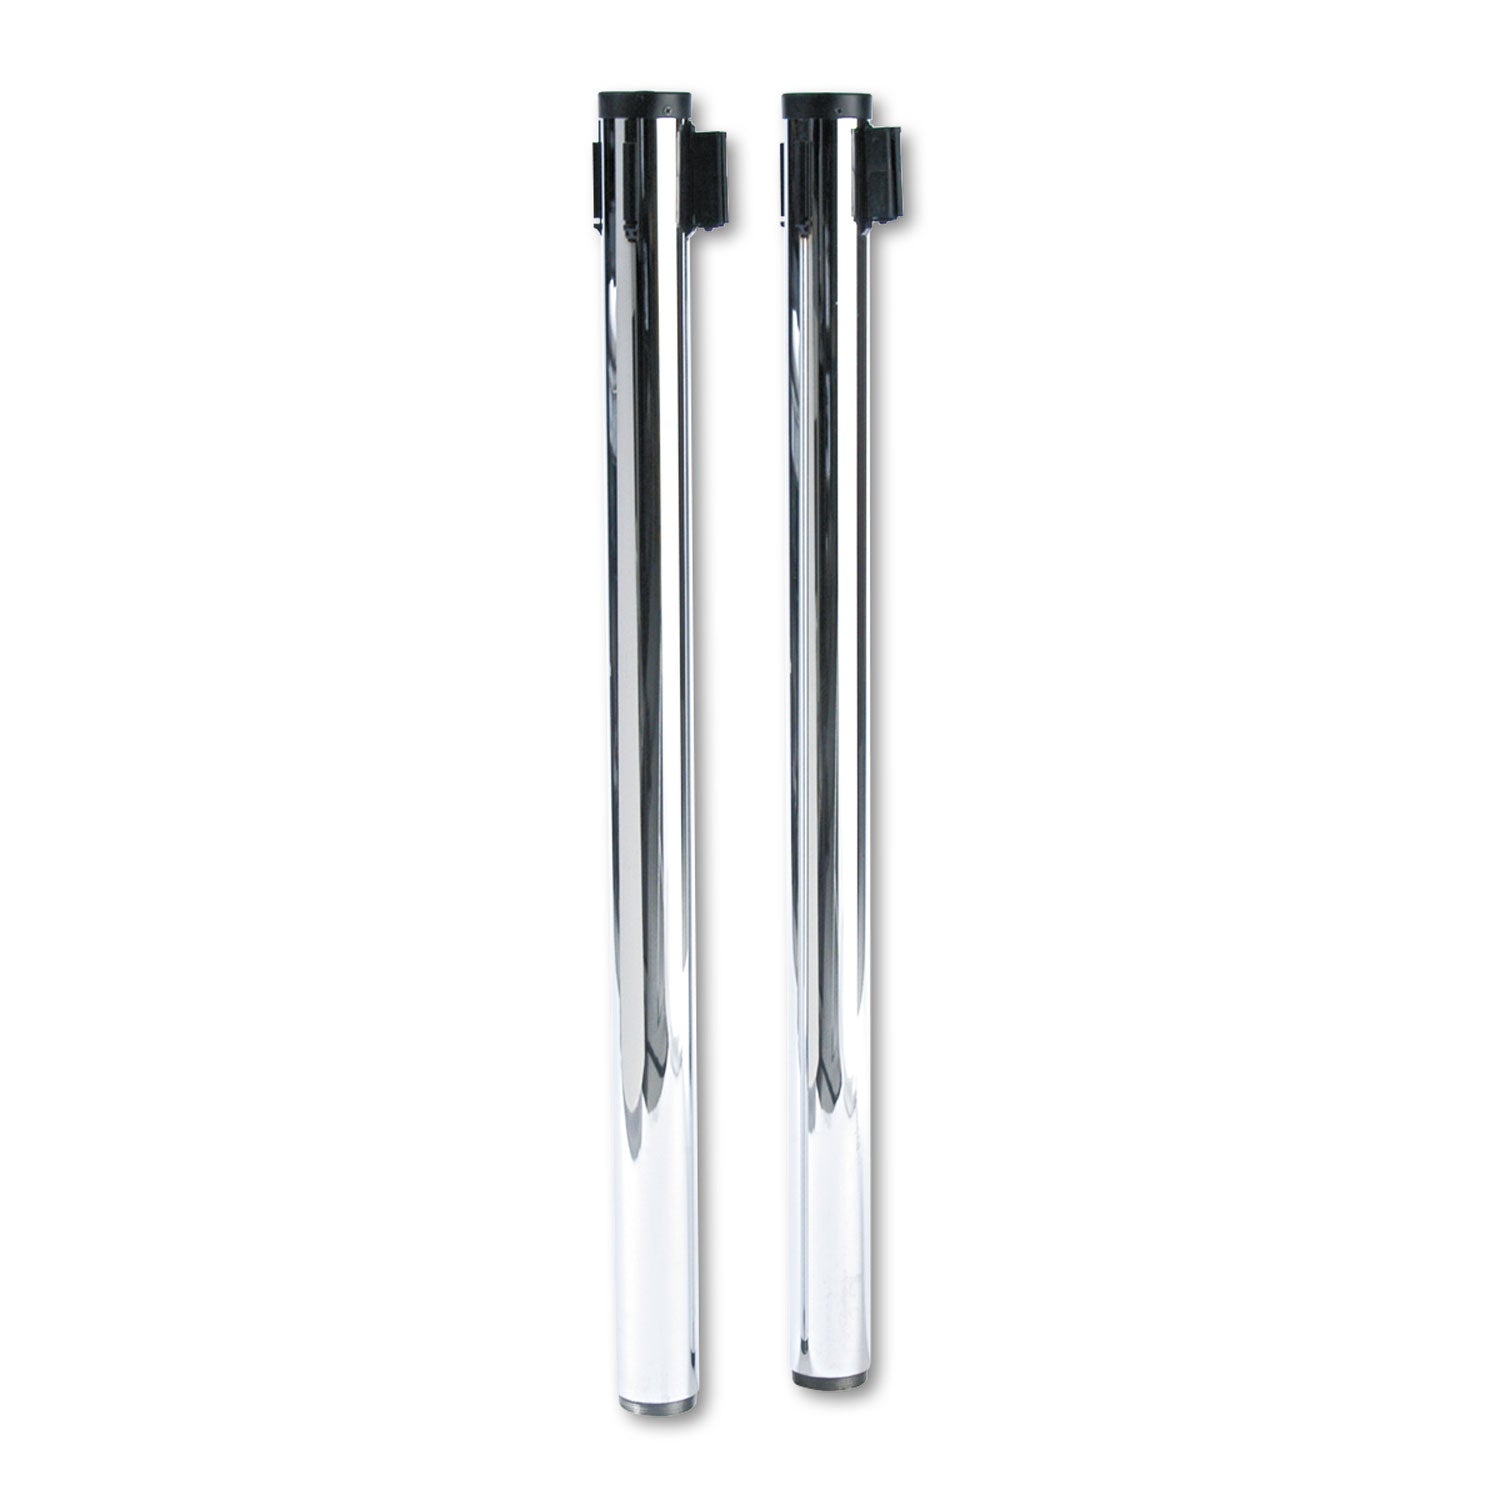 Adjusta-Tape Crowd Control Stanchion Posts Only, Polished Aluminum, 40" High, Silver, 2/Box - 